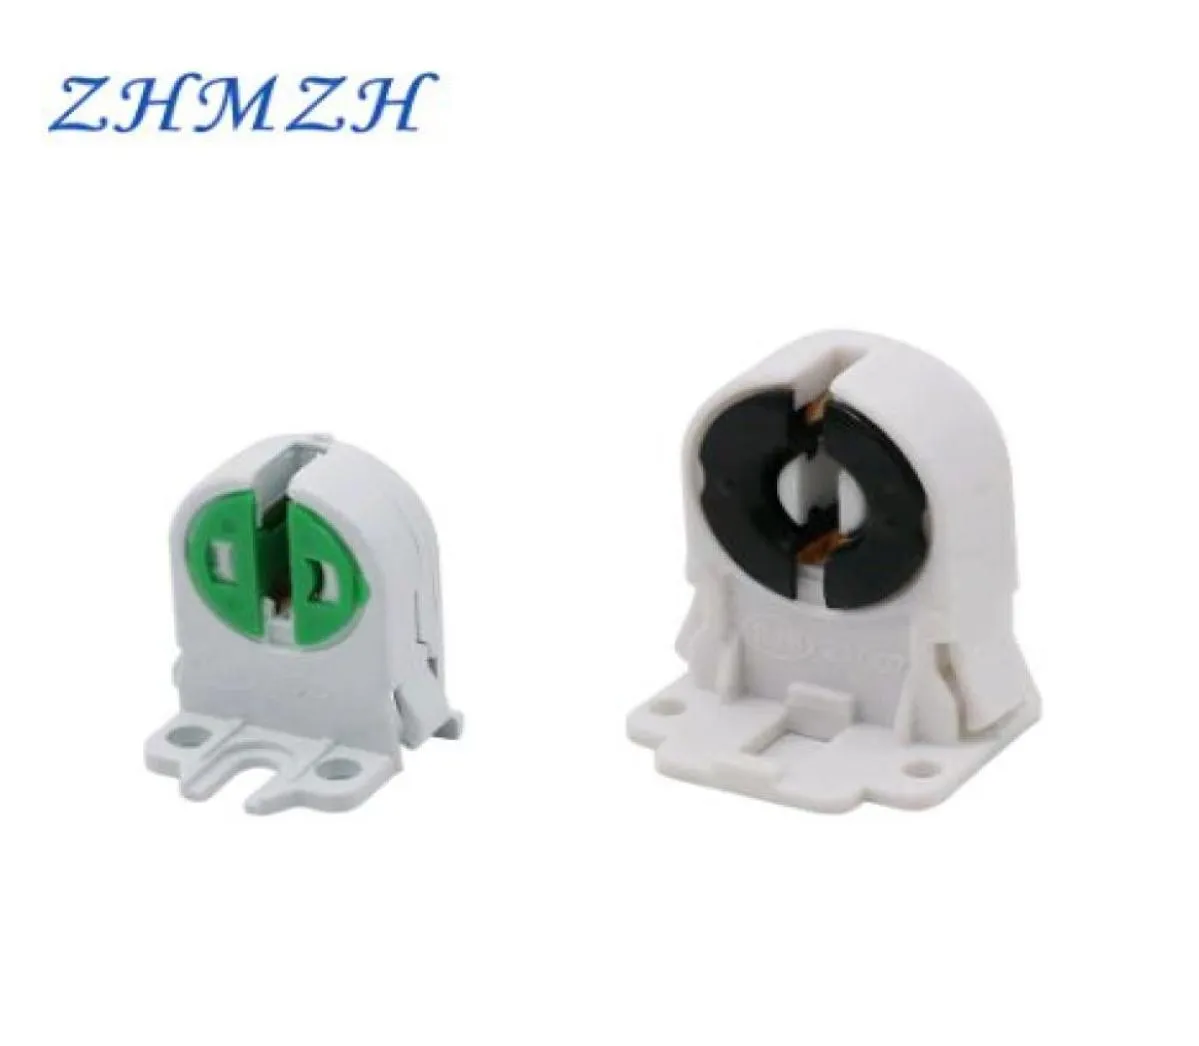 Pack of 20 NonShunted T8 Lamp Holder Socket Tombstone for LED Fluorescent Tube Replacements TurnType Lamphol5789700